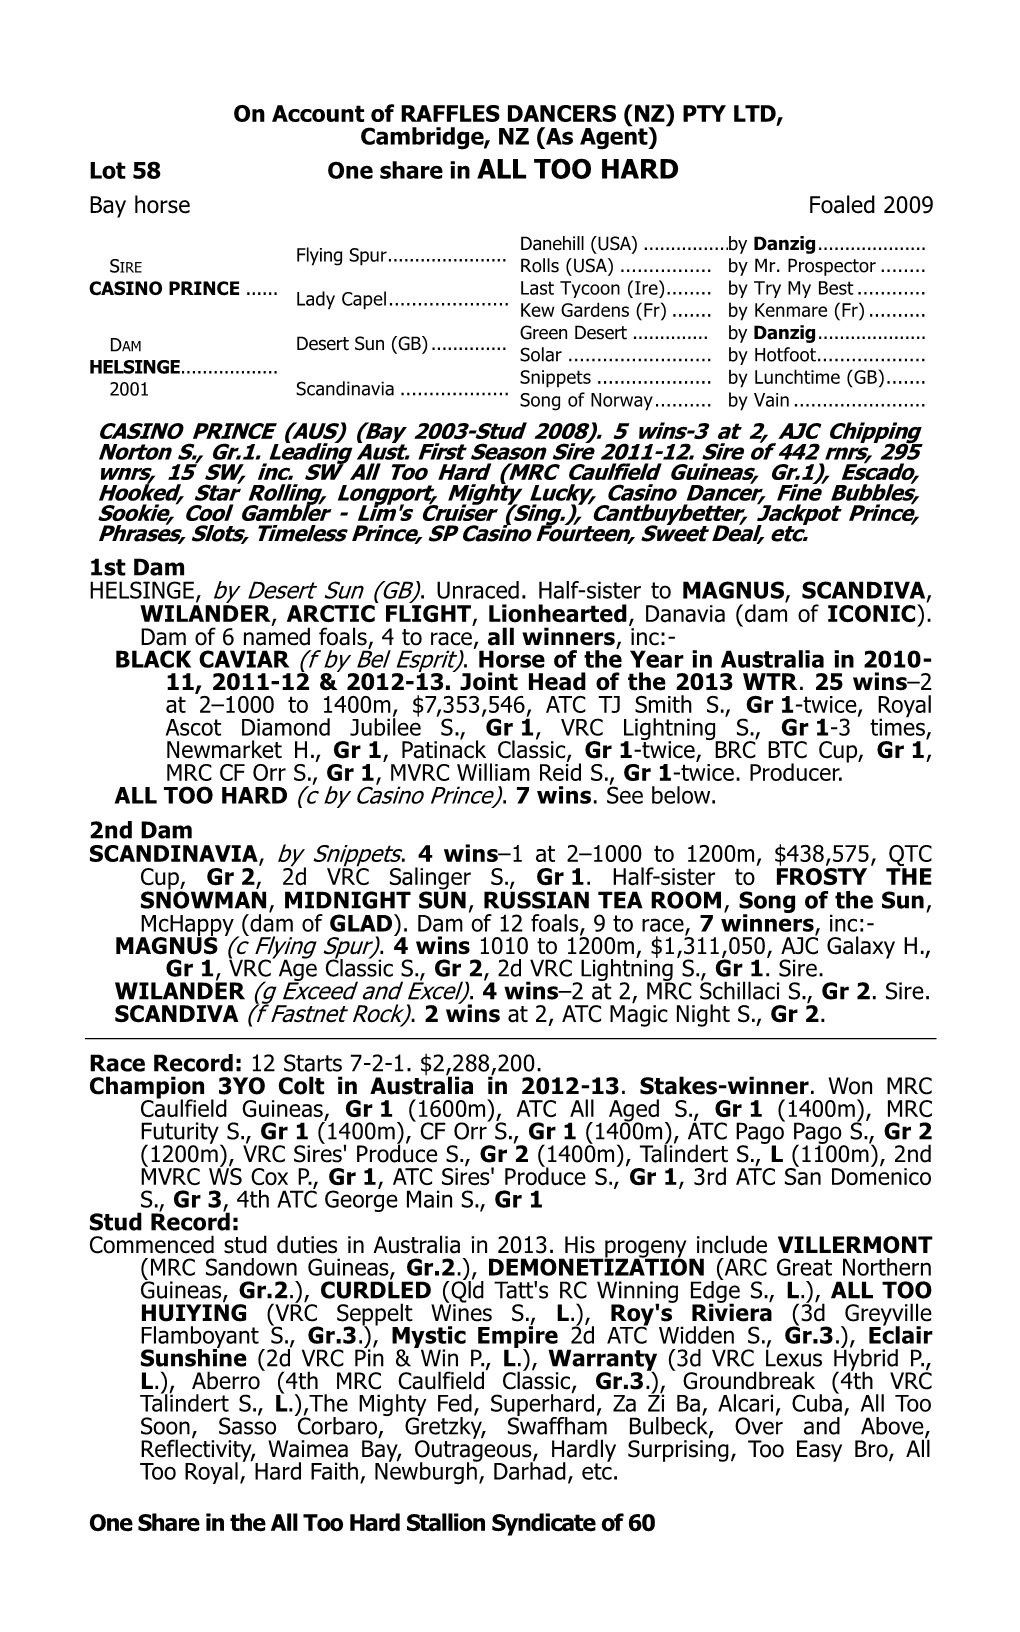 On Account of RAFFLES DANCERS (NZ) PTY LTD, Cambridge, NZ (As Agent) Lot 58 One Share in ALL TOO HARD